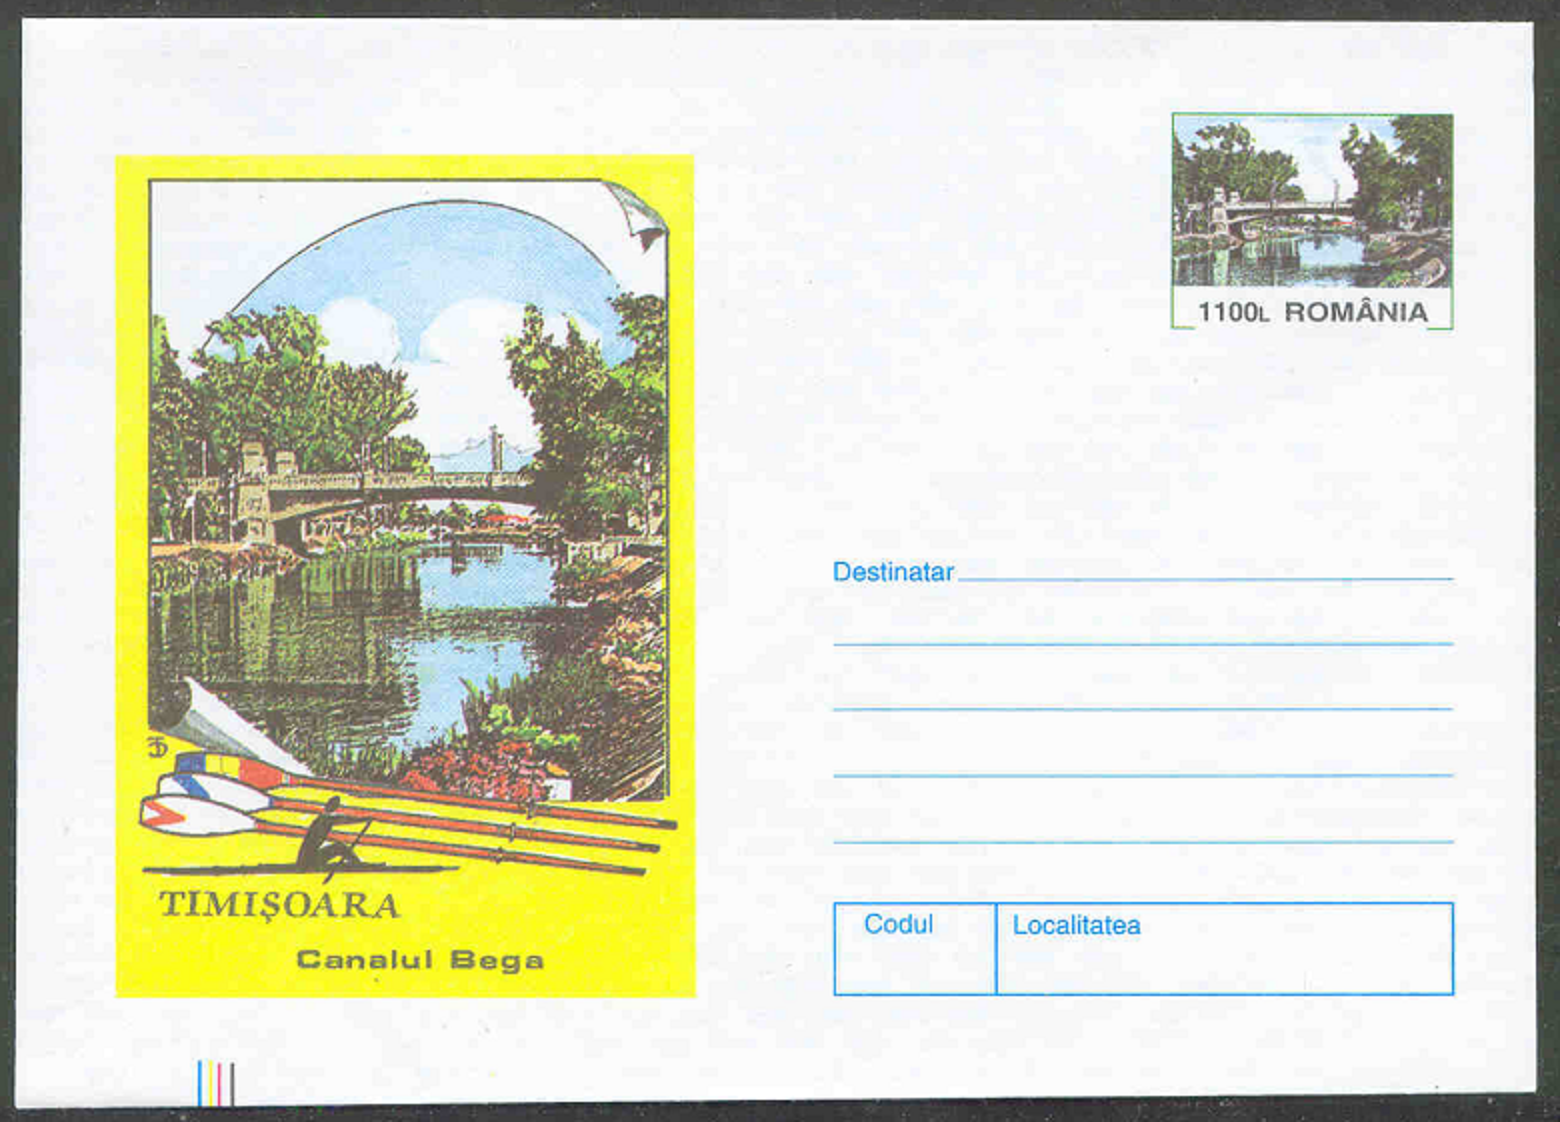 Stationary II ROU 1999 Timisoara coloured Photo of Canalul Bega with drawing of three oars and silhouette of 1X in foreground